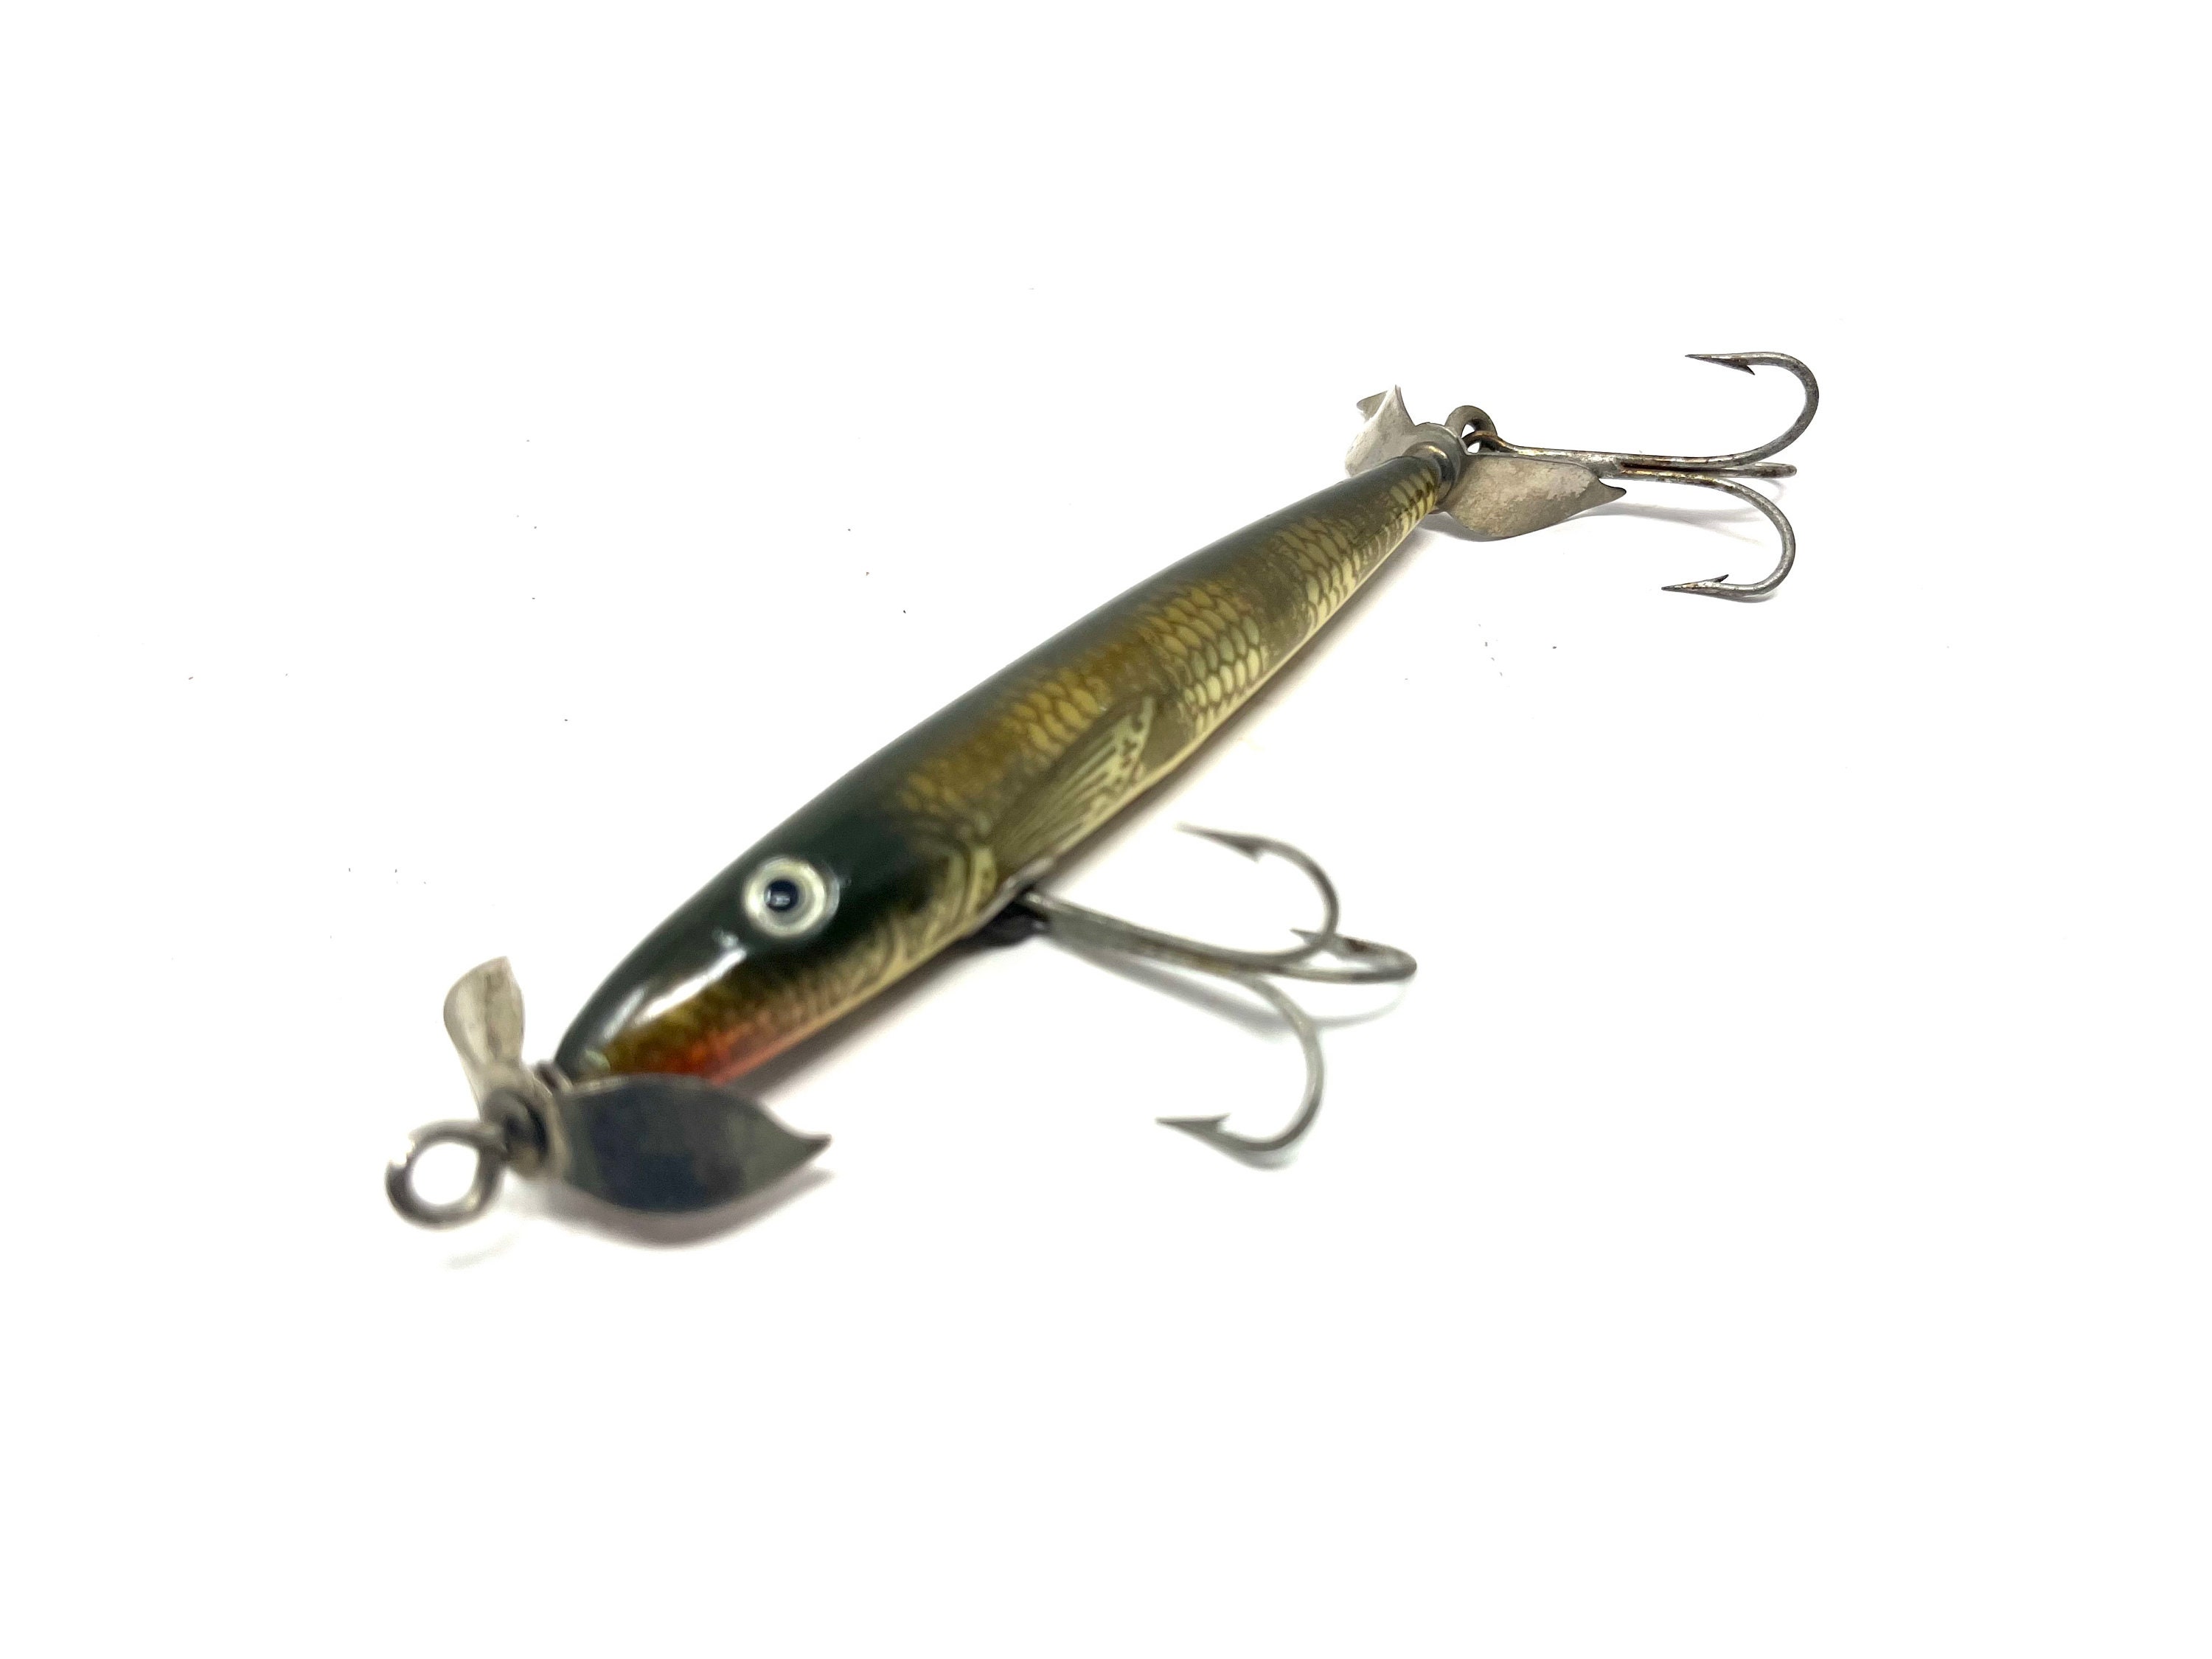 SHAKESPEARE SLIM JIM Lure Photo Finnish Nice Condition Marked Spinner B58  $45.50 - PicClick